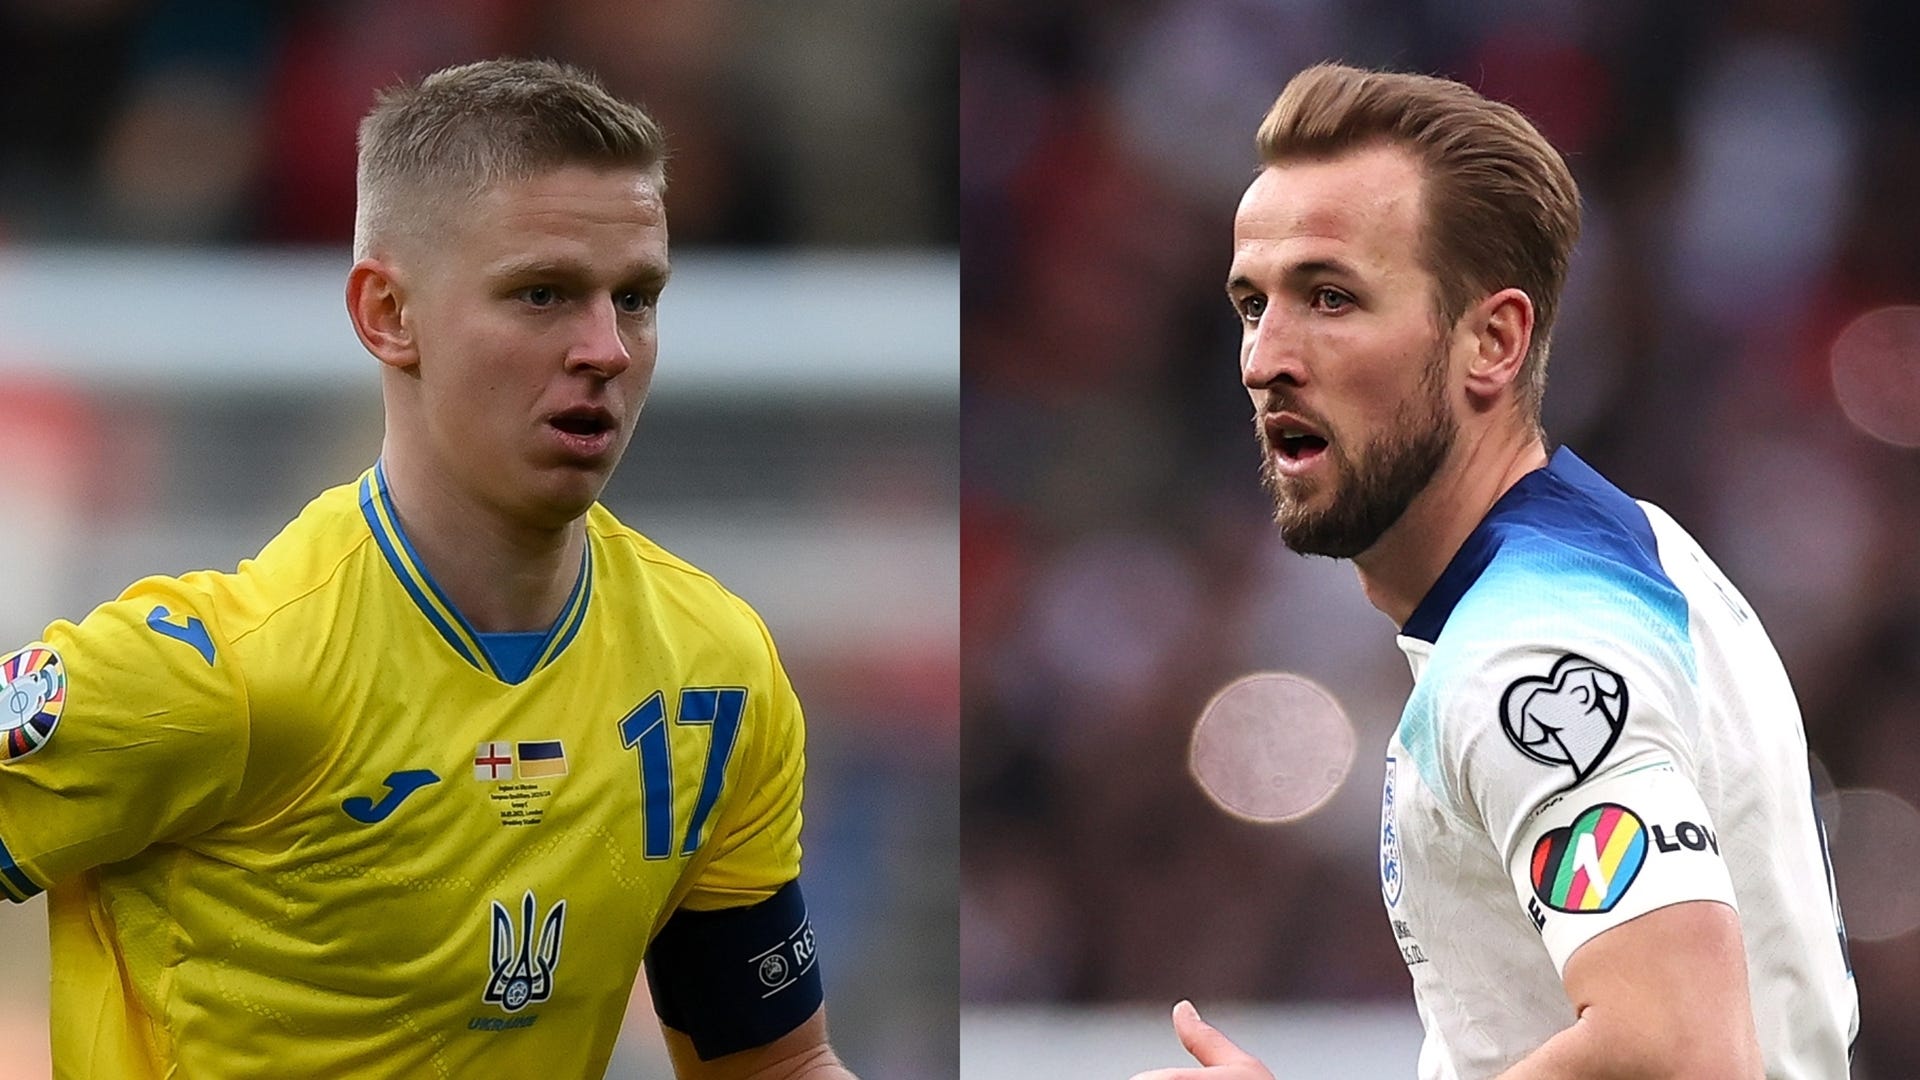 Ukraine vs England Live stream, TV channel, kick-off time and where to watch Goal UK